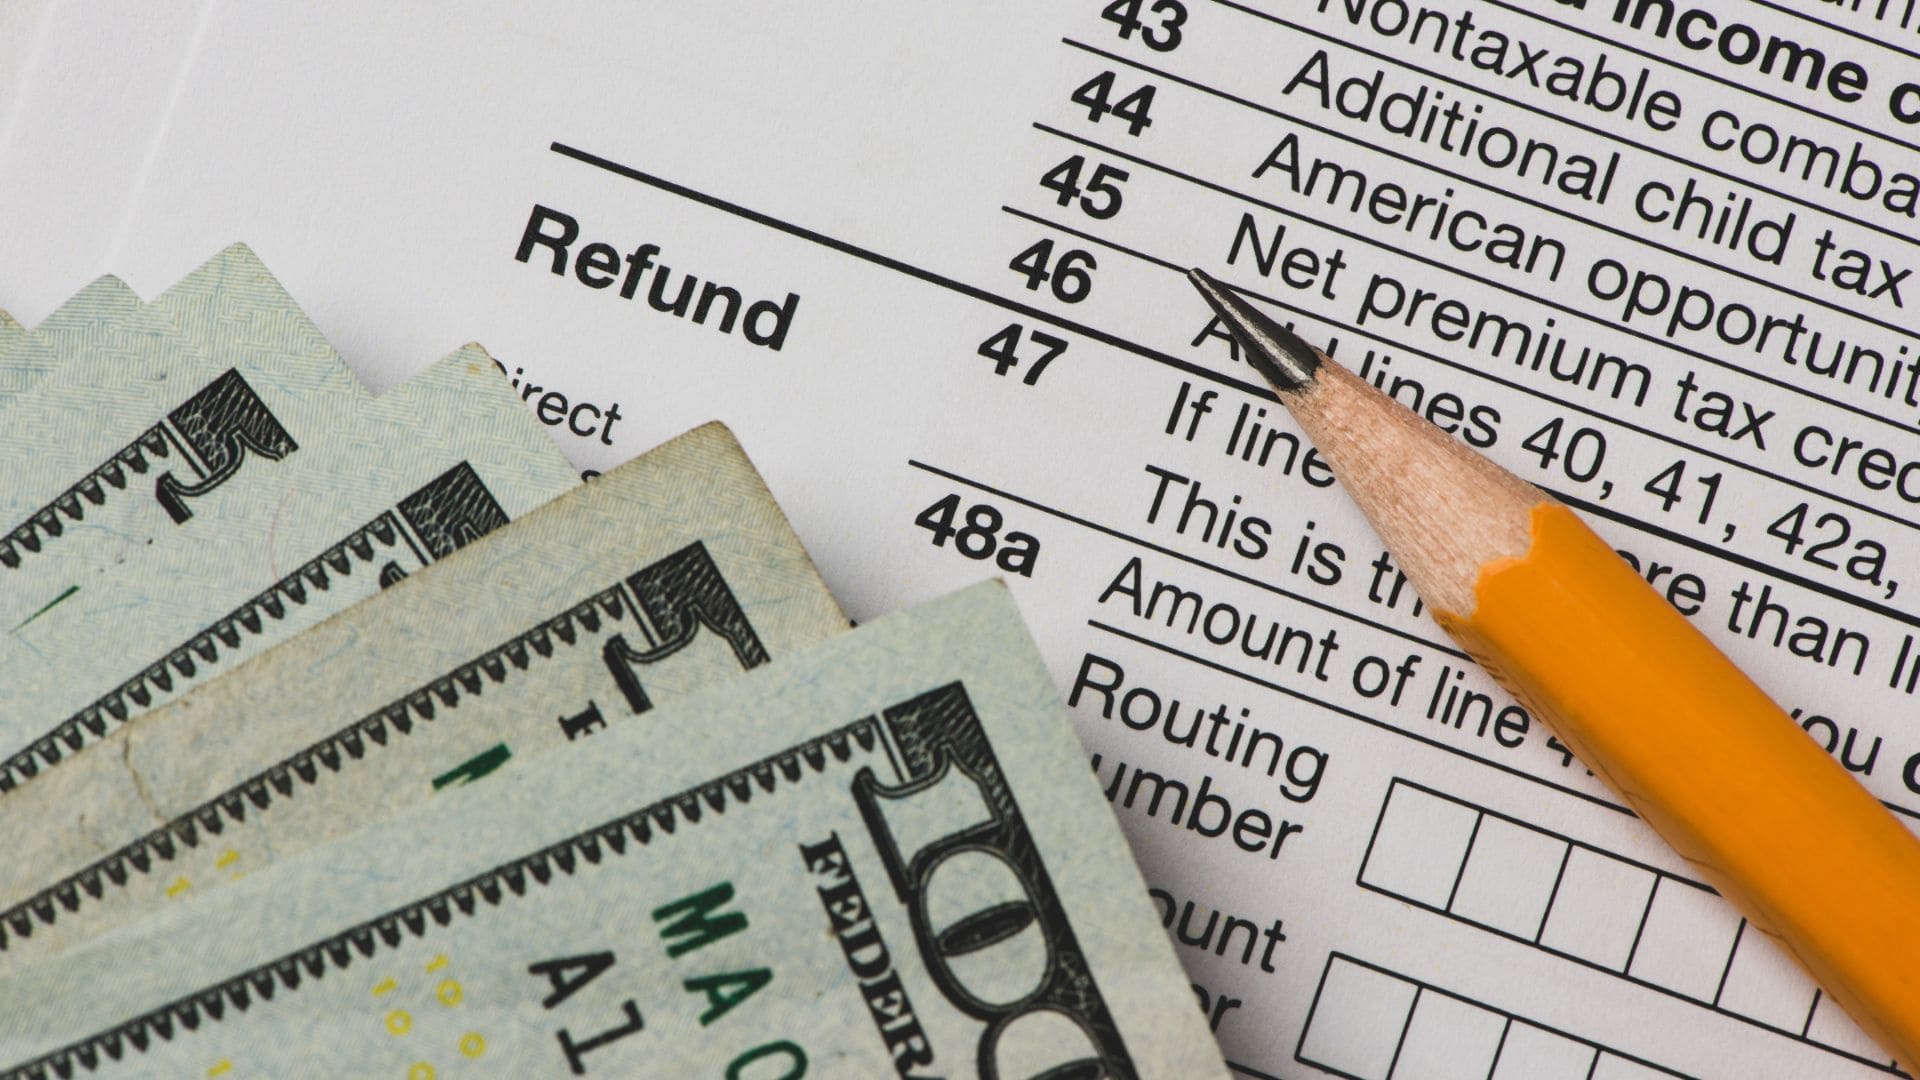 If you have paid your taxes you could get a Stimulus check from the IRS